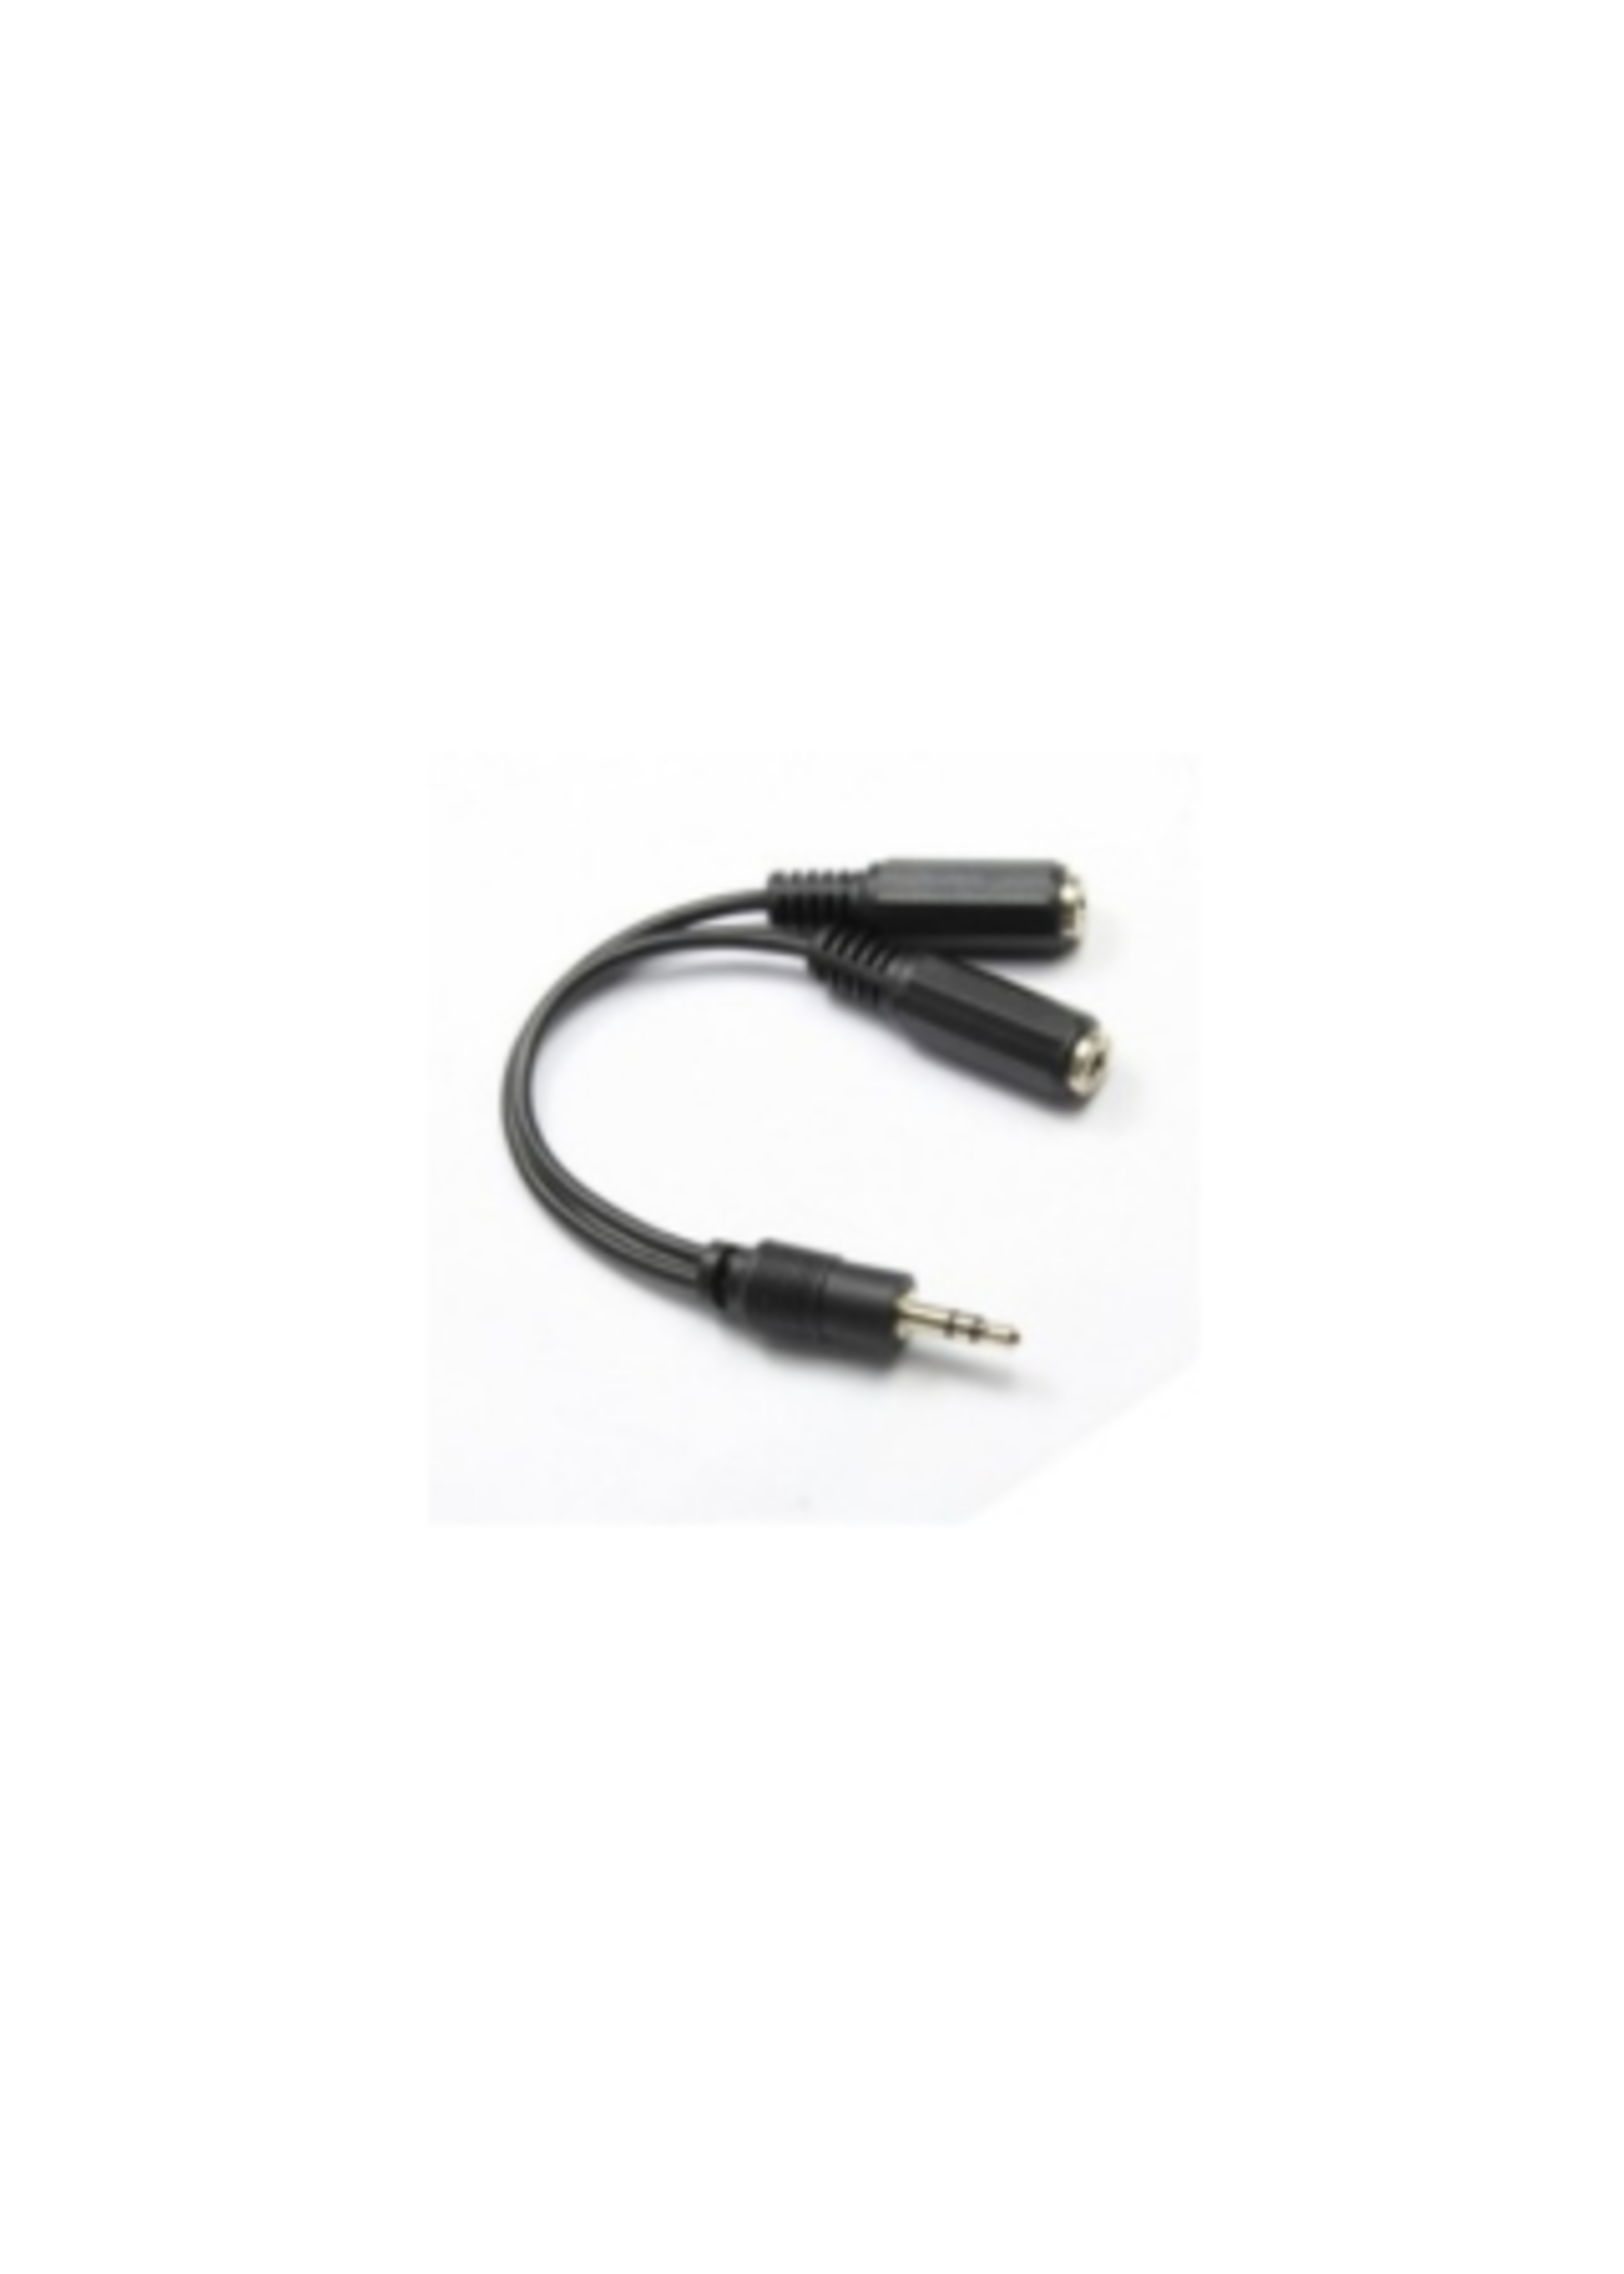 AUDIO 3.5MM STEREO CABLE Y